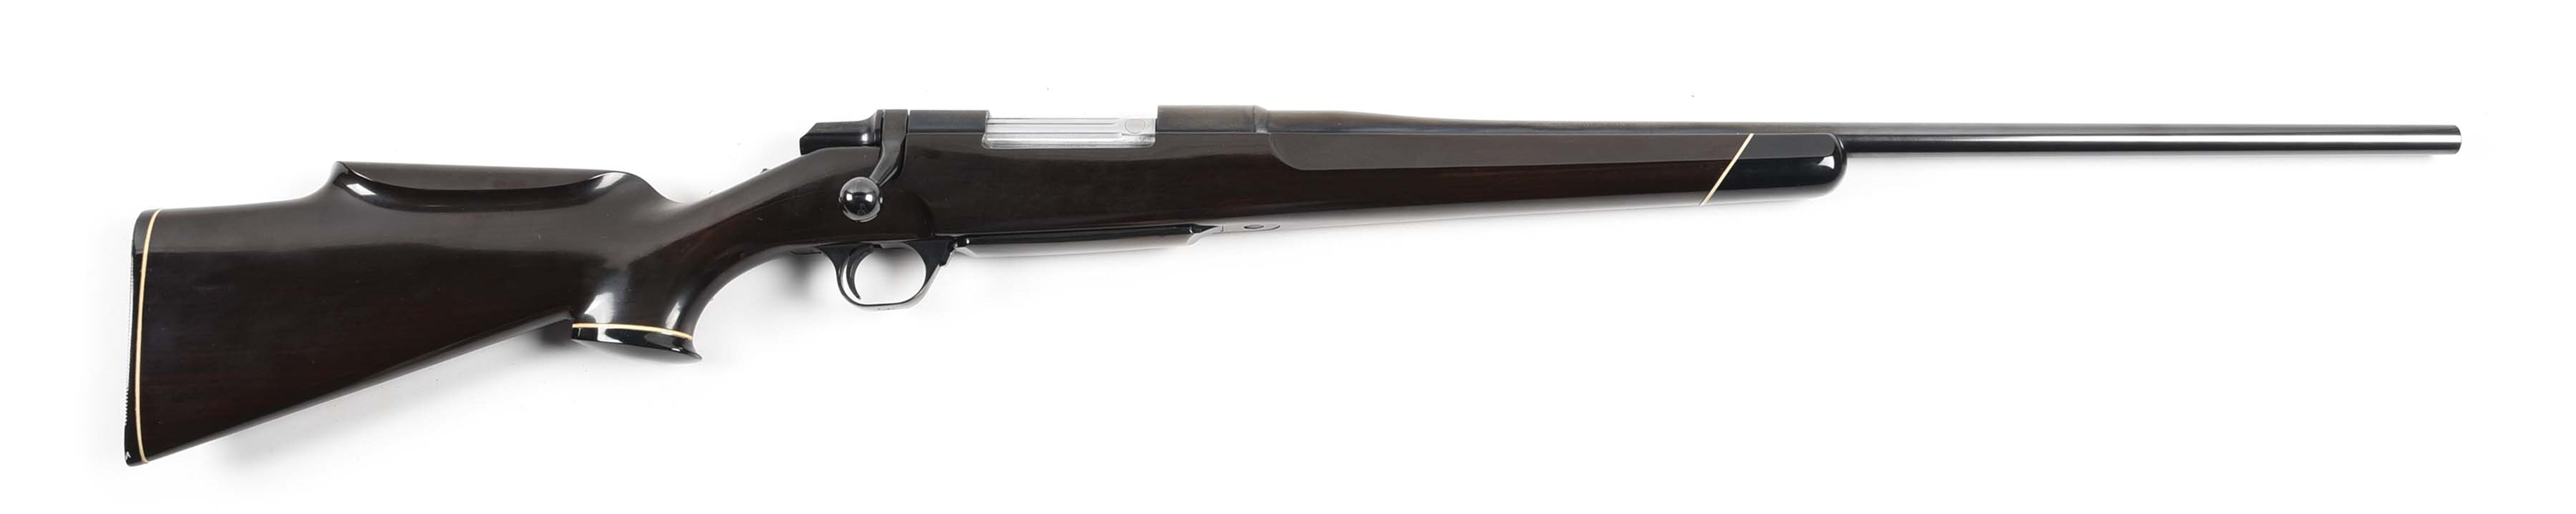 (M) BROWNING BBR BOLT ACTION RIFLE WITH EBONY MOZAMBIQUE STOCK.